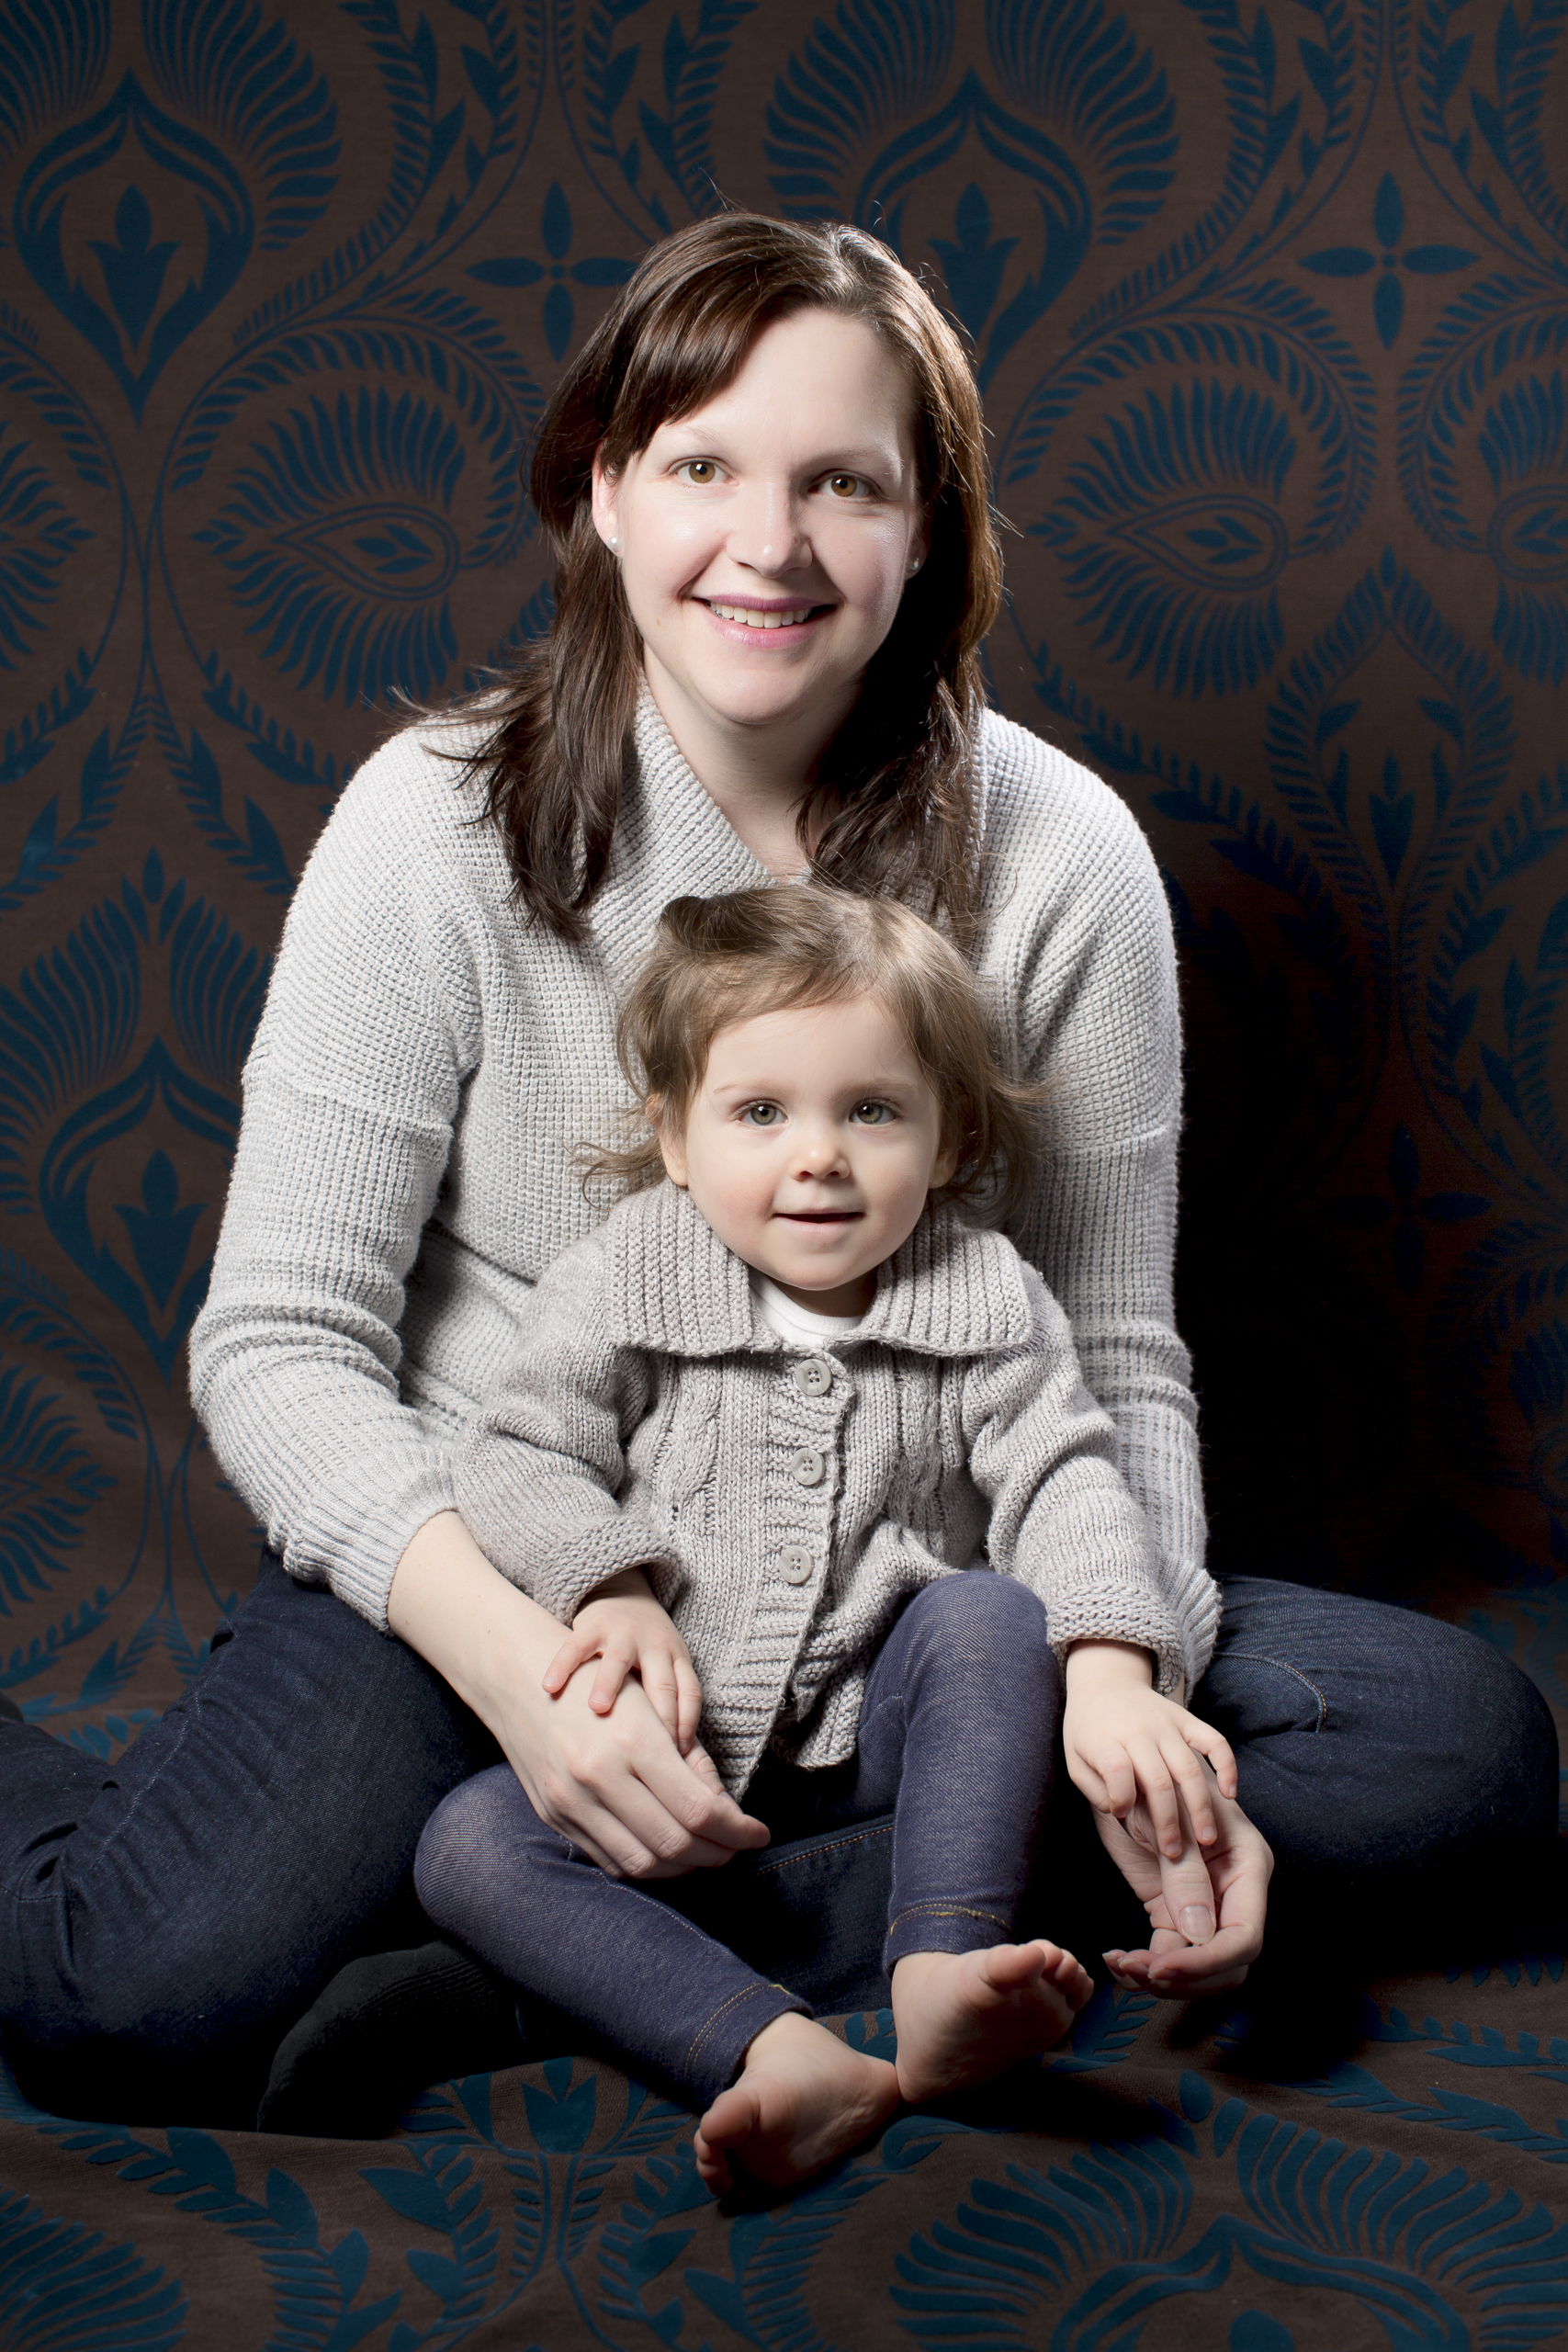 31 newborn baby momma and baby sister portrait photography session jeans and knit sweaters.jpg